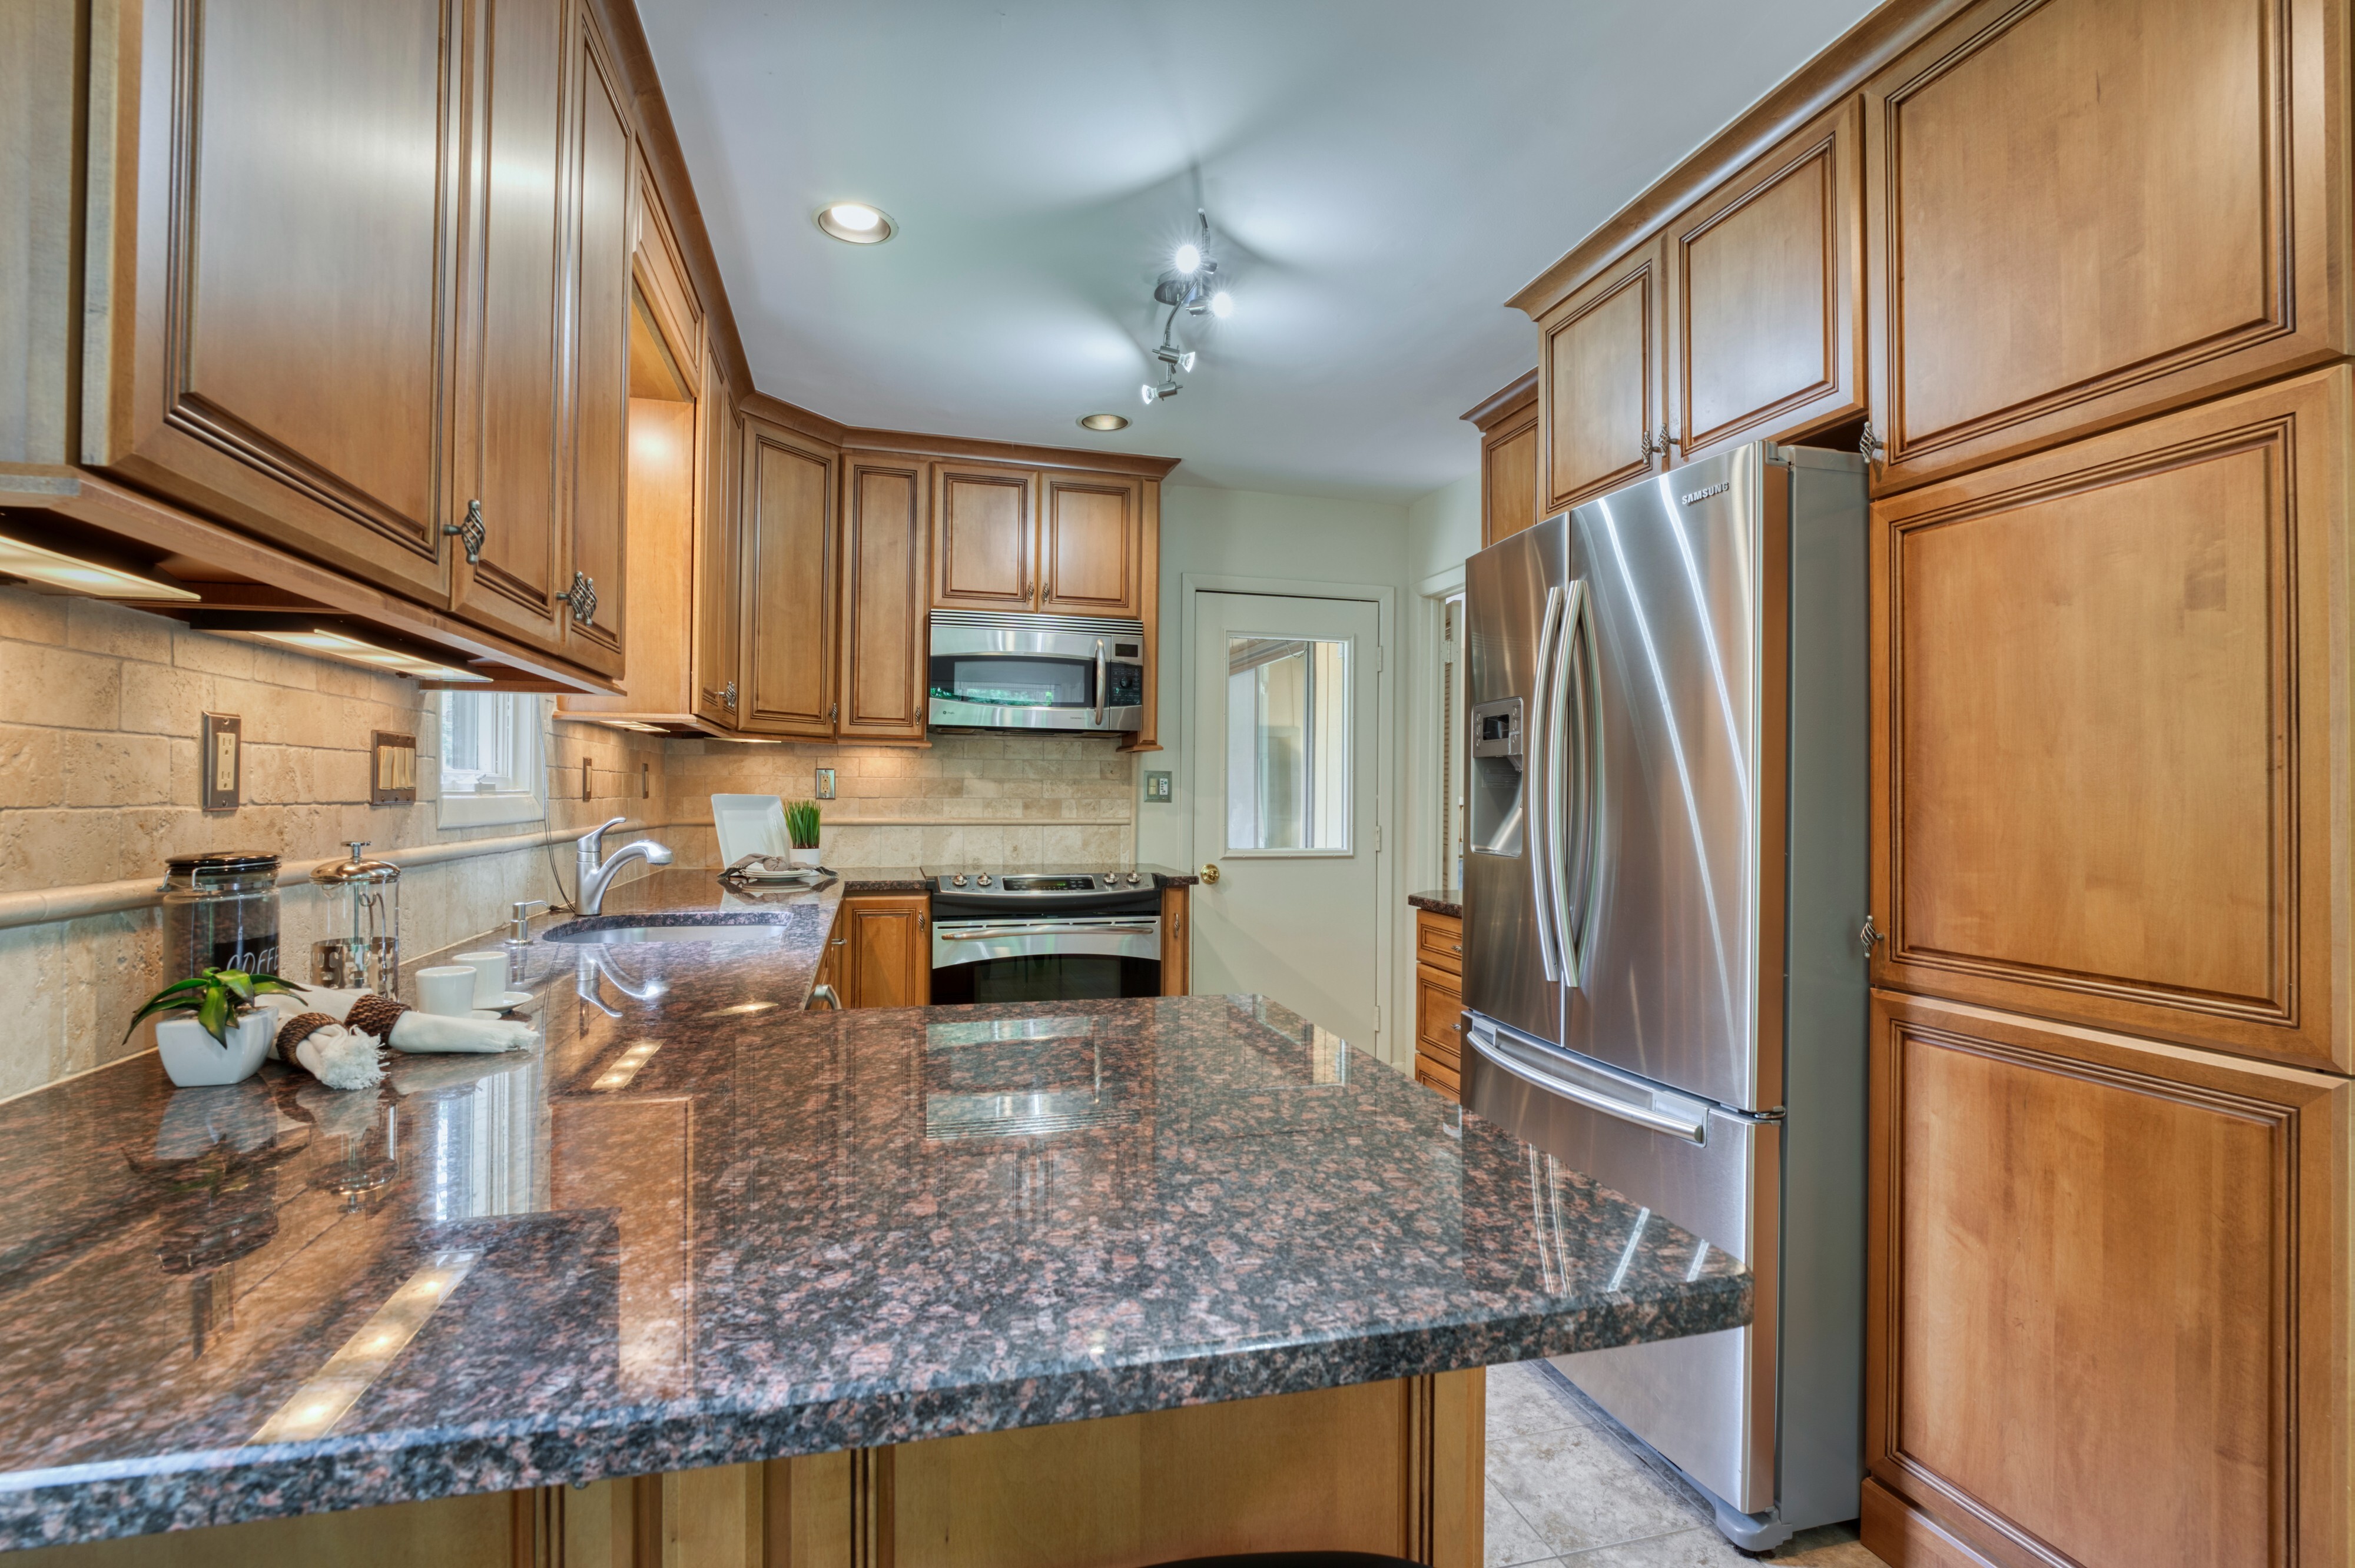 Professional interior photo of 5222 Bradfield Dr in Burke, Virginia - showing the kitchen with walnut cabinets and grey stone countertops and stainless appliances